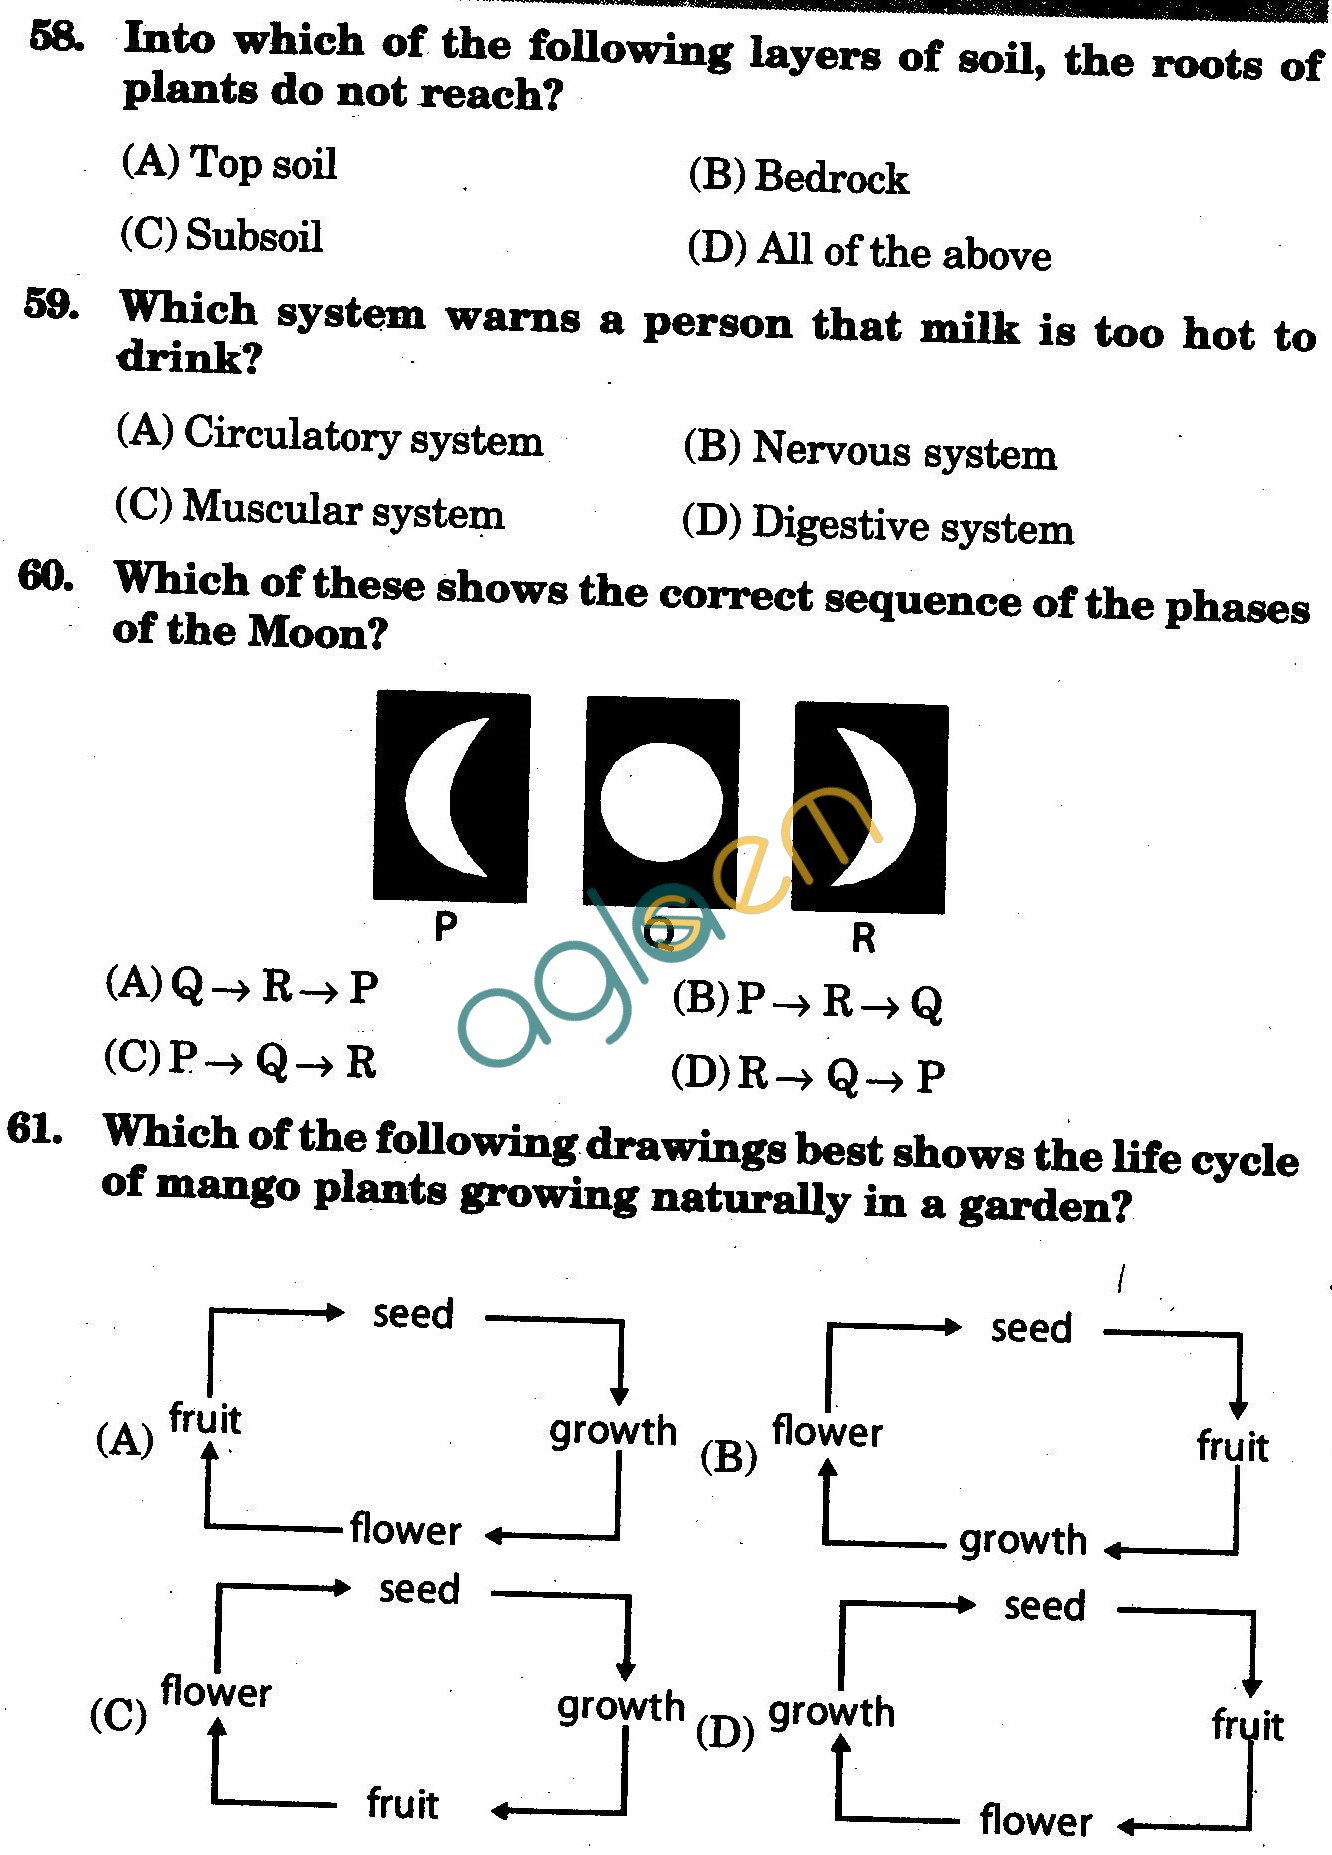 NSTSE 2010 Class III Question Paper with Answers - Science